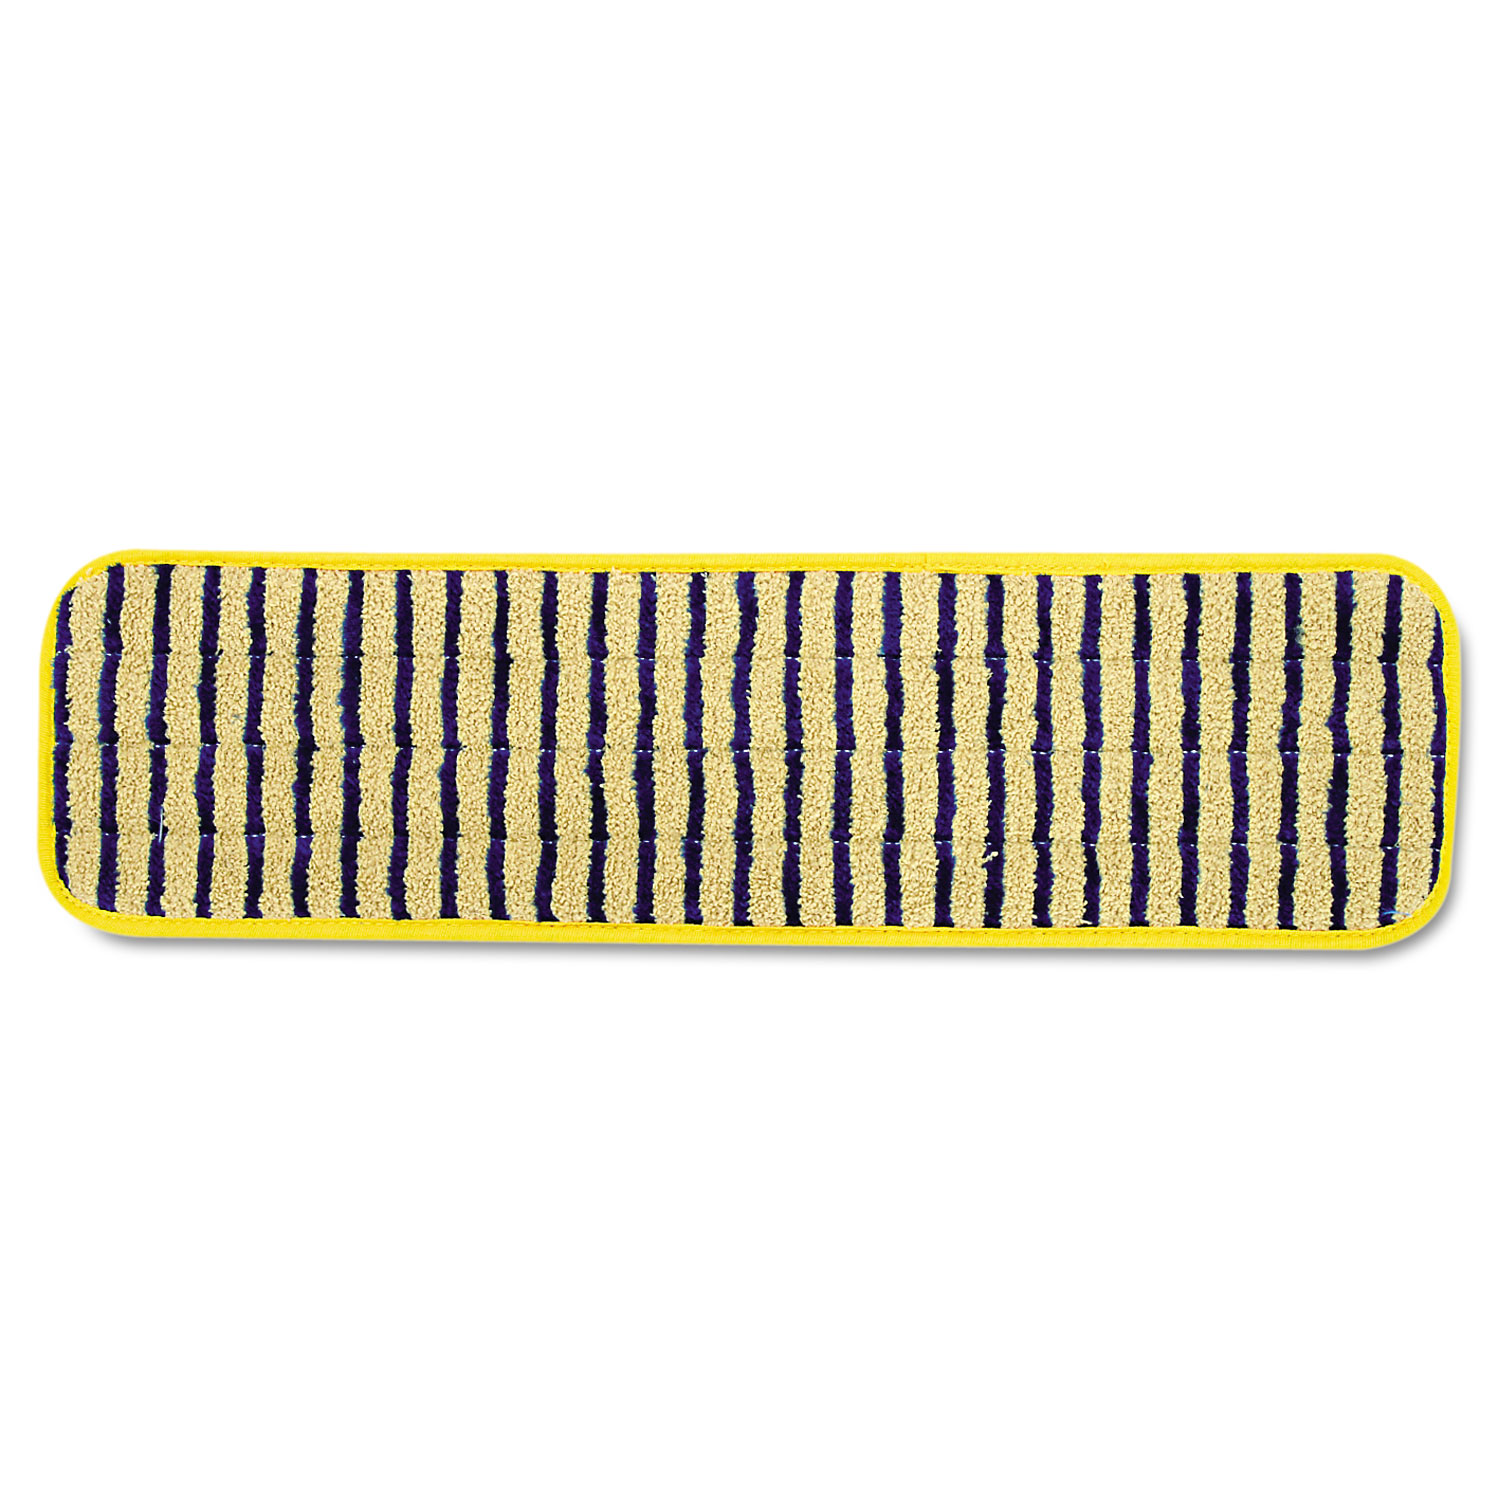  Rubbermaid Commercial FGQ81000YL00 Microfiber Scrubber Pad, Vertical Polyprolene Stripes, 18, Yellow, 6/Carton (RCPQ810YEL) 